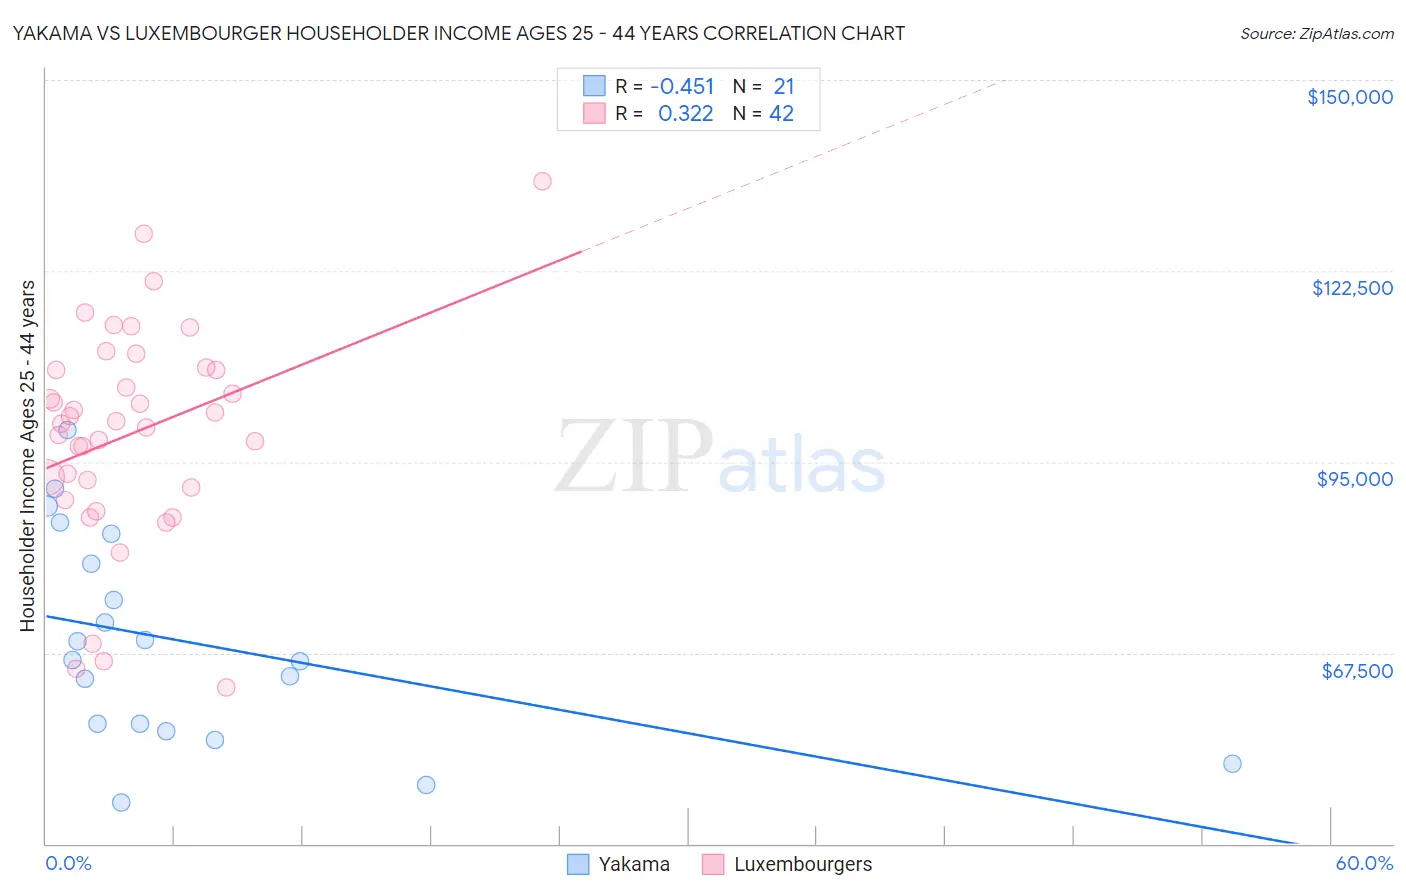 Yakama vs Luxembourger Householder Income Ages 25 - 44 years